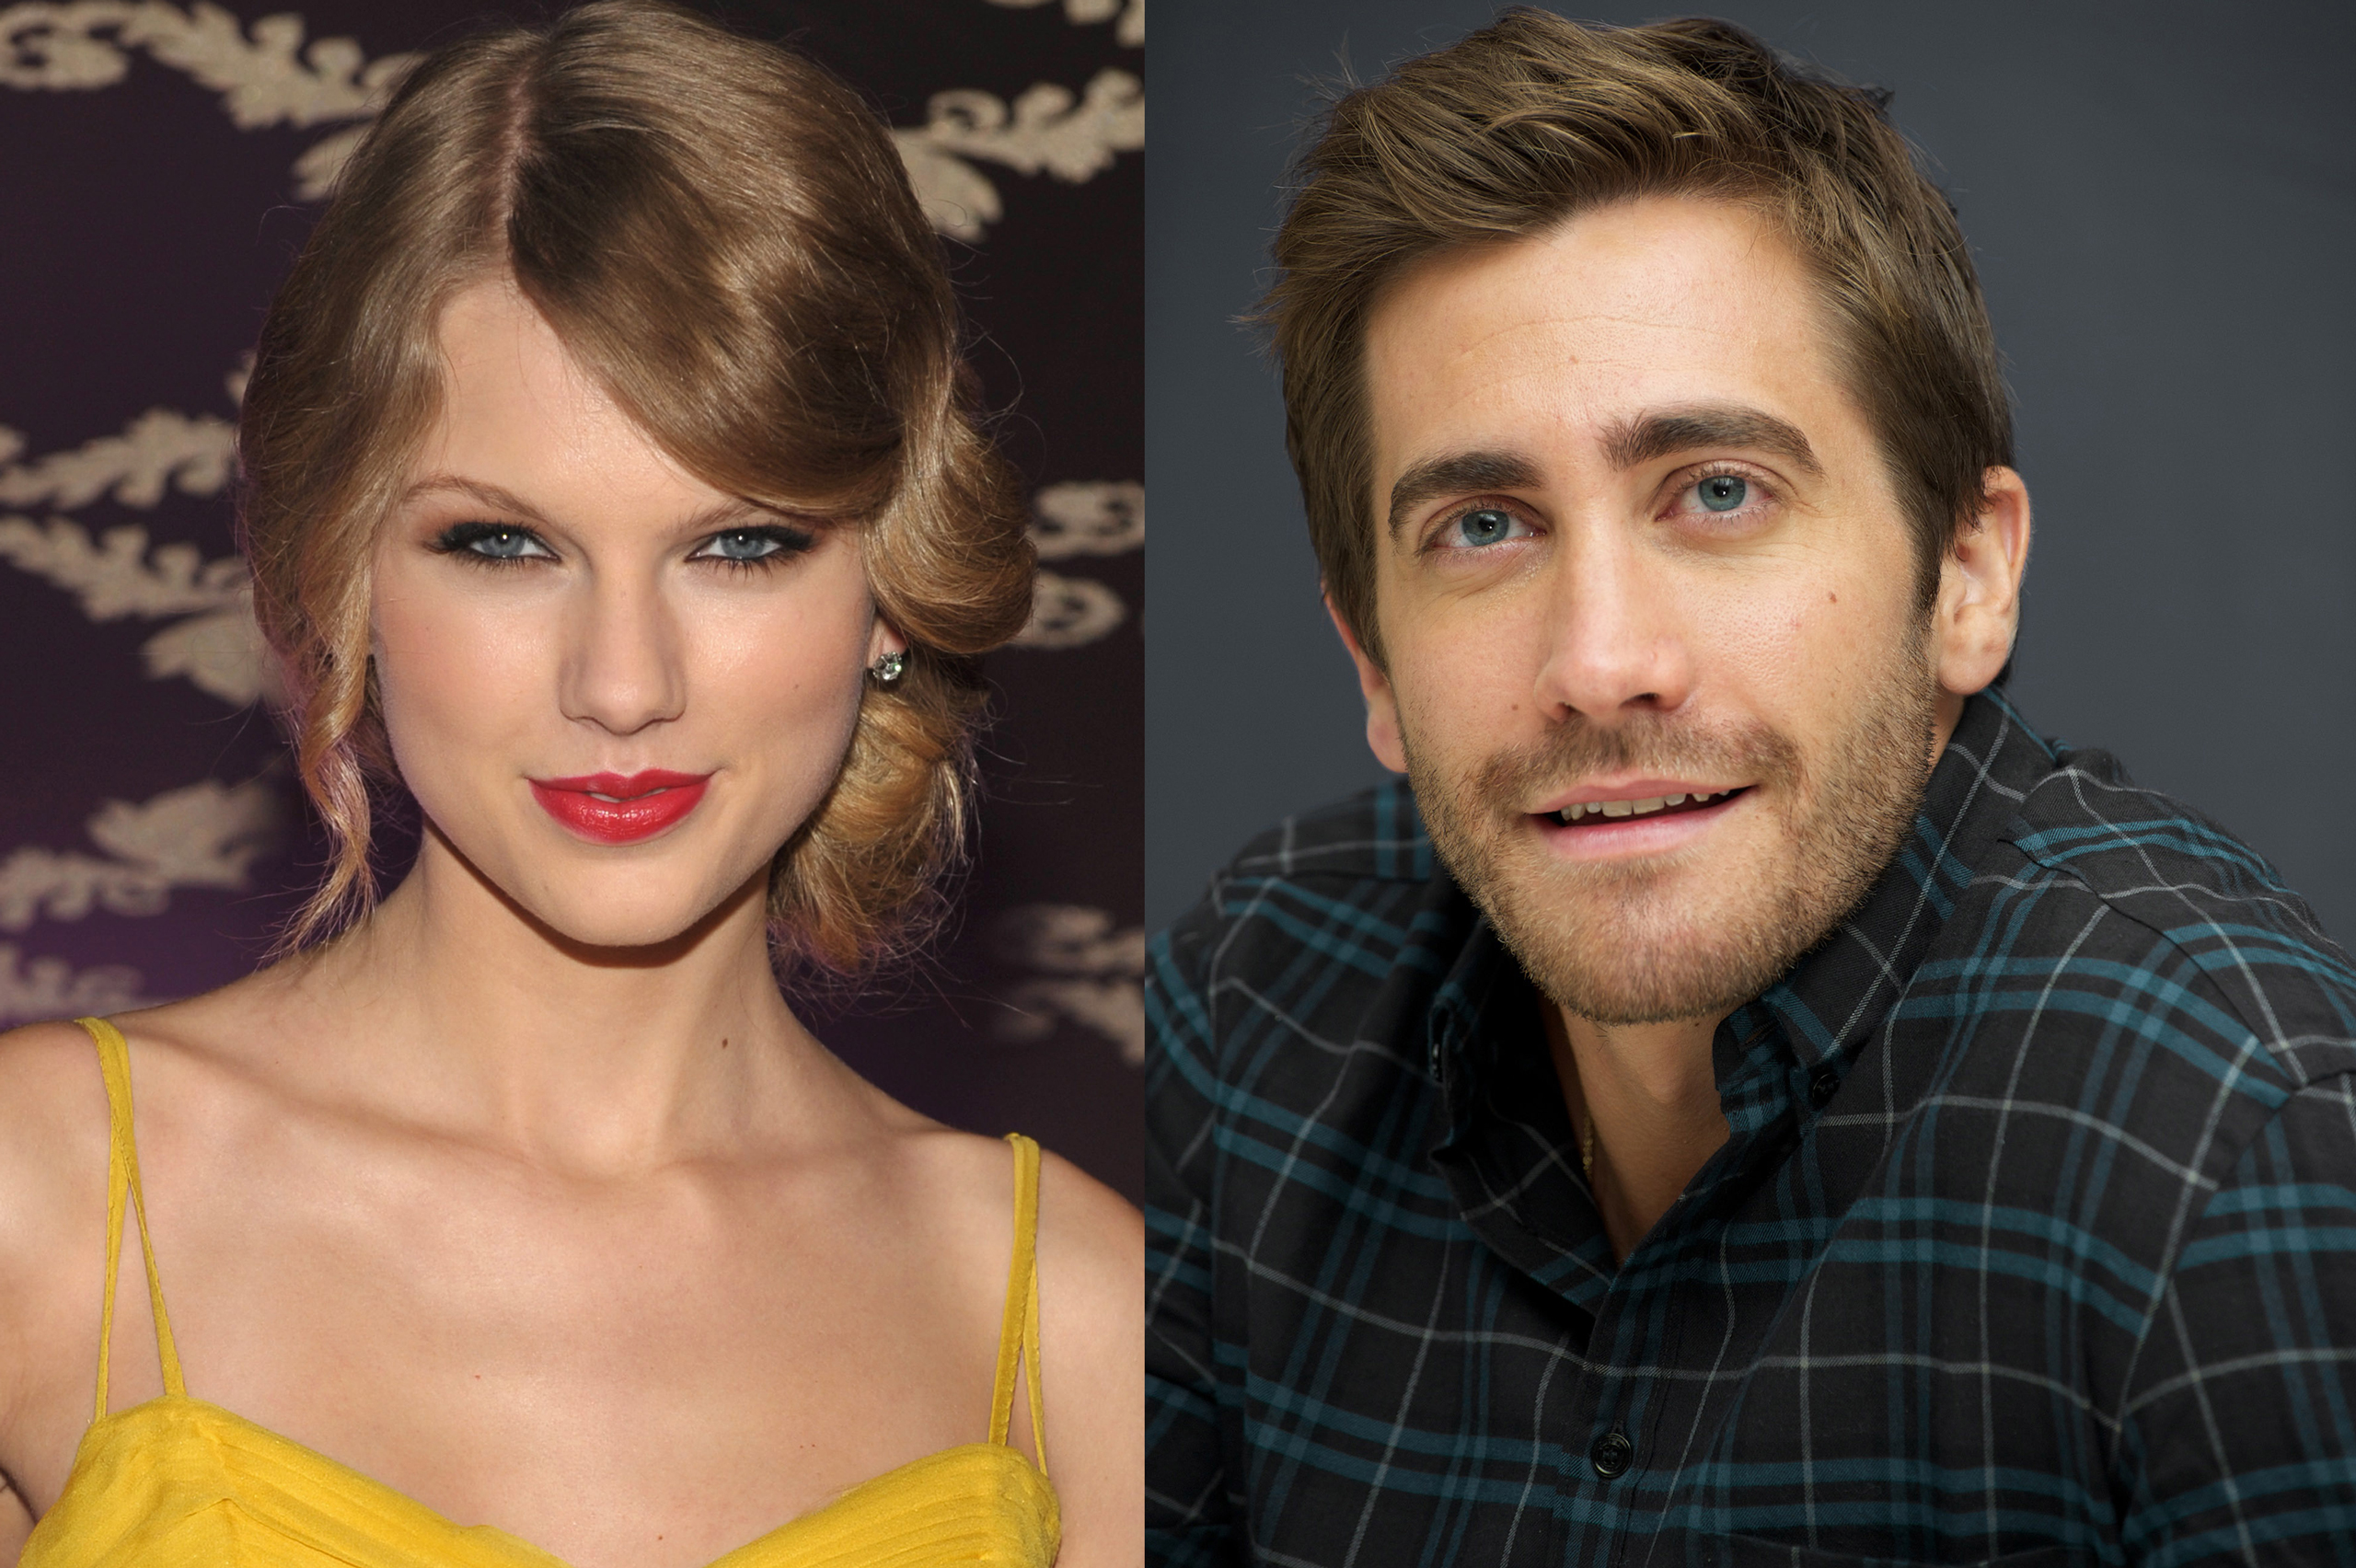 Taylor Swift attends the Country Music Hall Of Fame Museum's "All For The Hall" in Los Angeles on Sept. 23, 2010; Jake Gyllenhaal at the "Love And Other Drugs" Press Conference in New York on Nov. 6, 2010. (John Shearer—Getty Images;Vera Anderson—Getty Images)